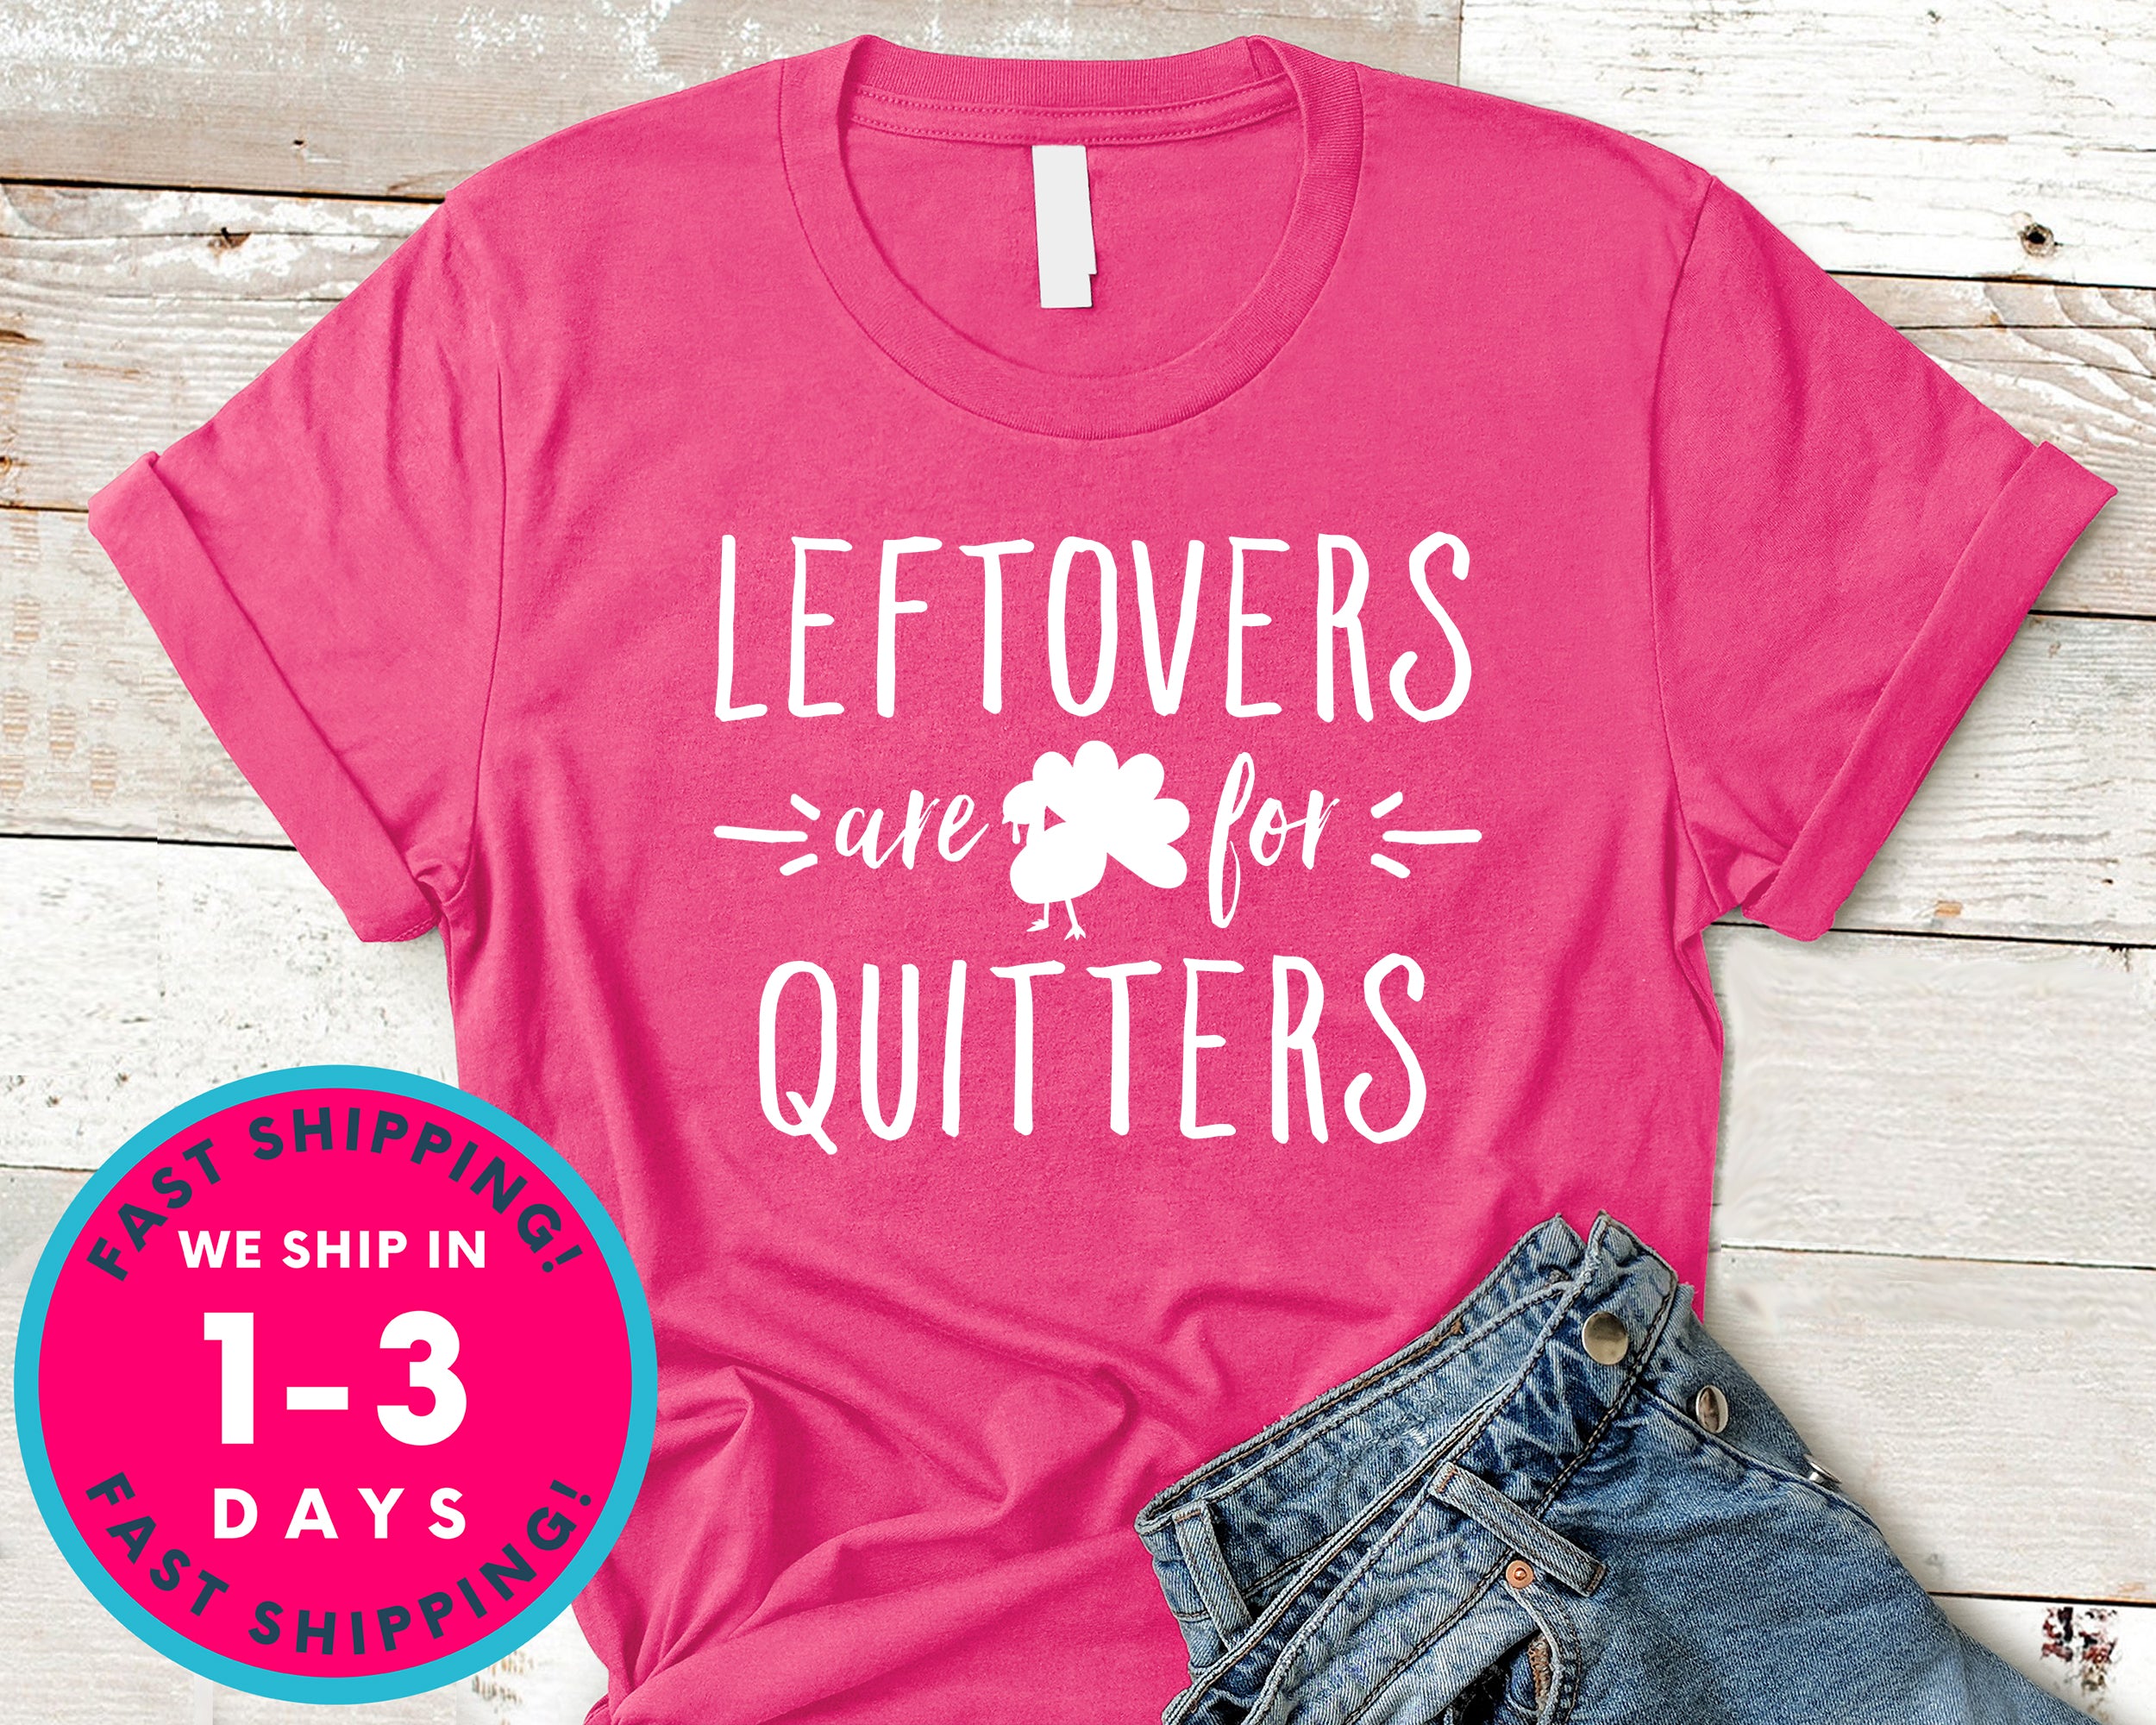 Left Overs Are For Quitters T-Shirt - Autmn Fall Thanksgiving Shirt